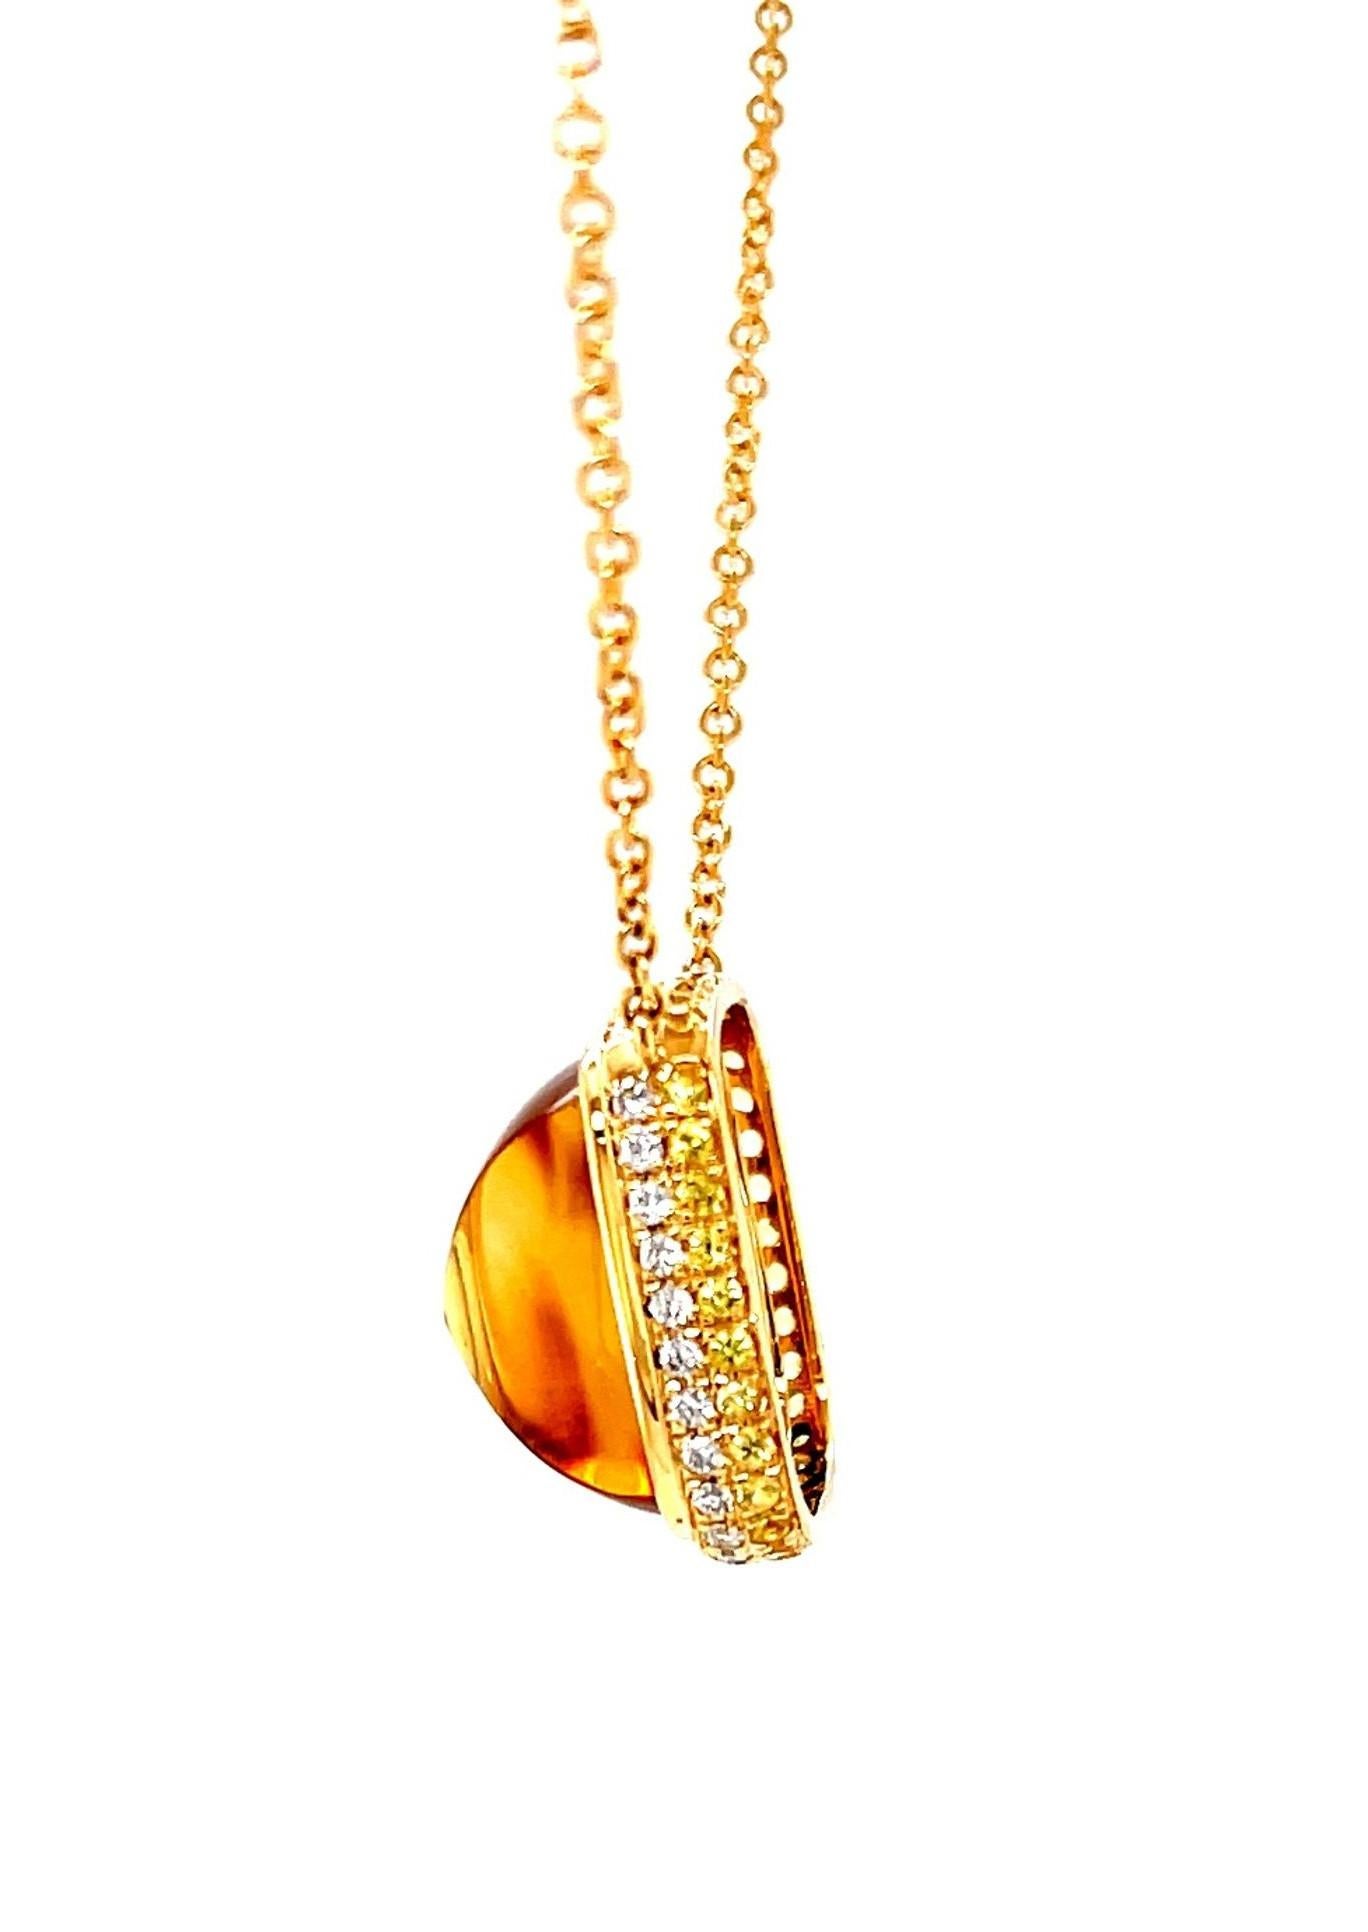 Artisan 16.79 Carat Citrine Cabochon, Yellow Sapphire and Diamond Necklace  For Sale